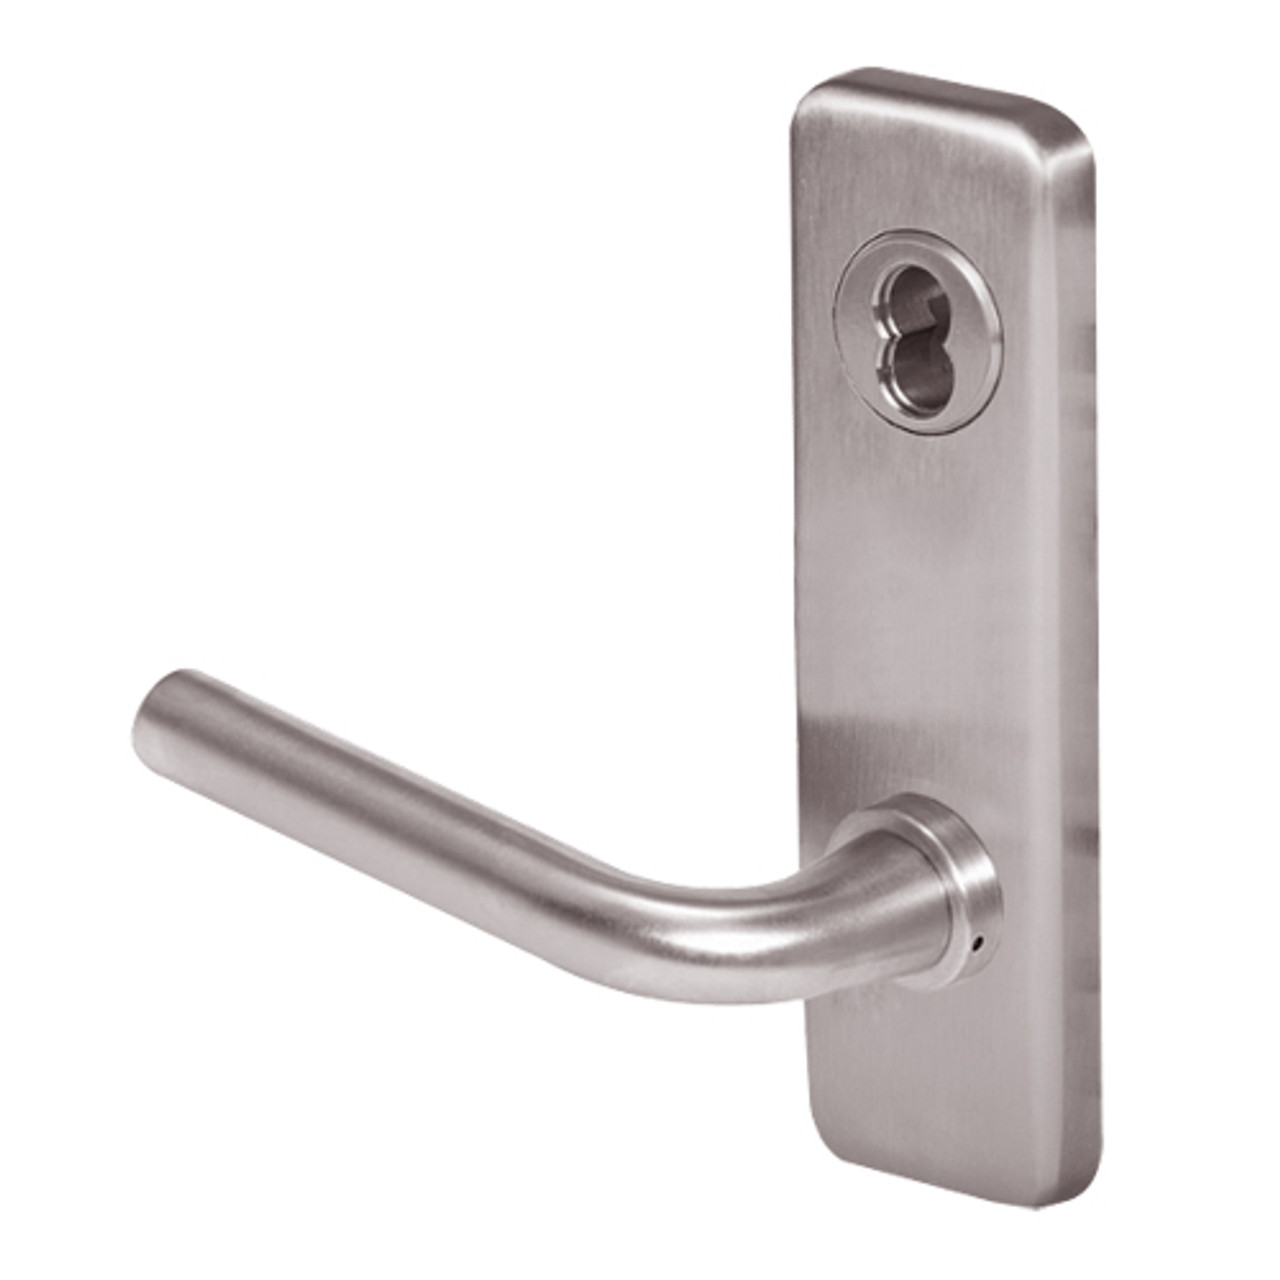 45H0L12J630 Best 40H Series Privacy with Deadbolt Heavy Duty Mortise Lever Lock with Solid Tube with No Return in Satin Stainless Steel